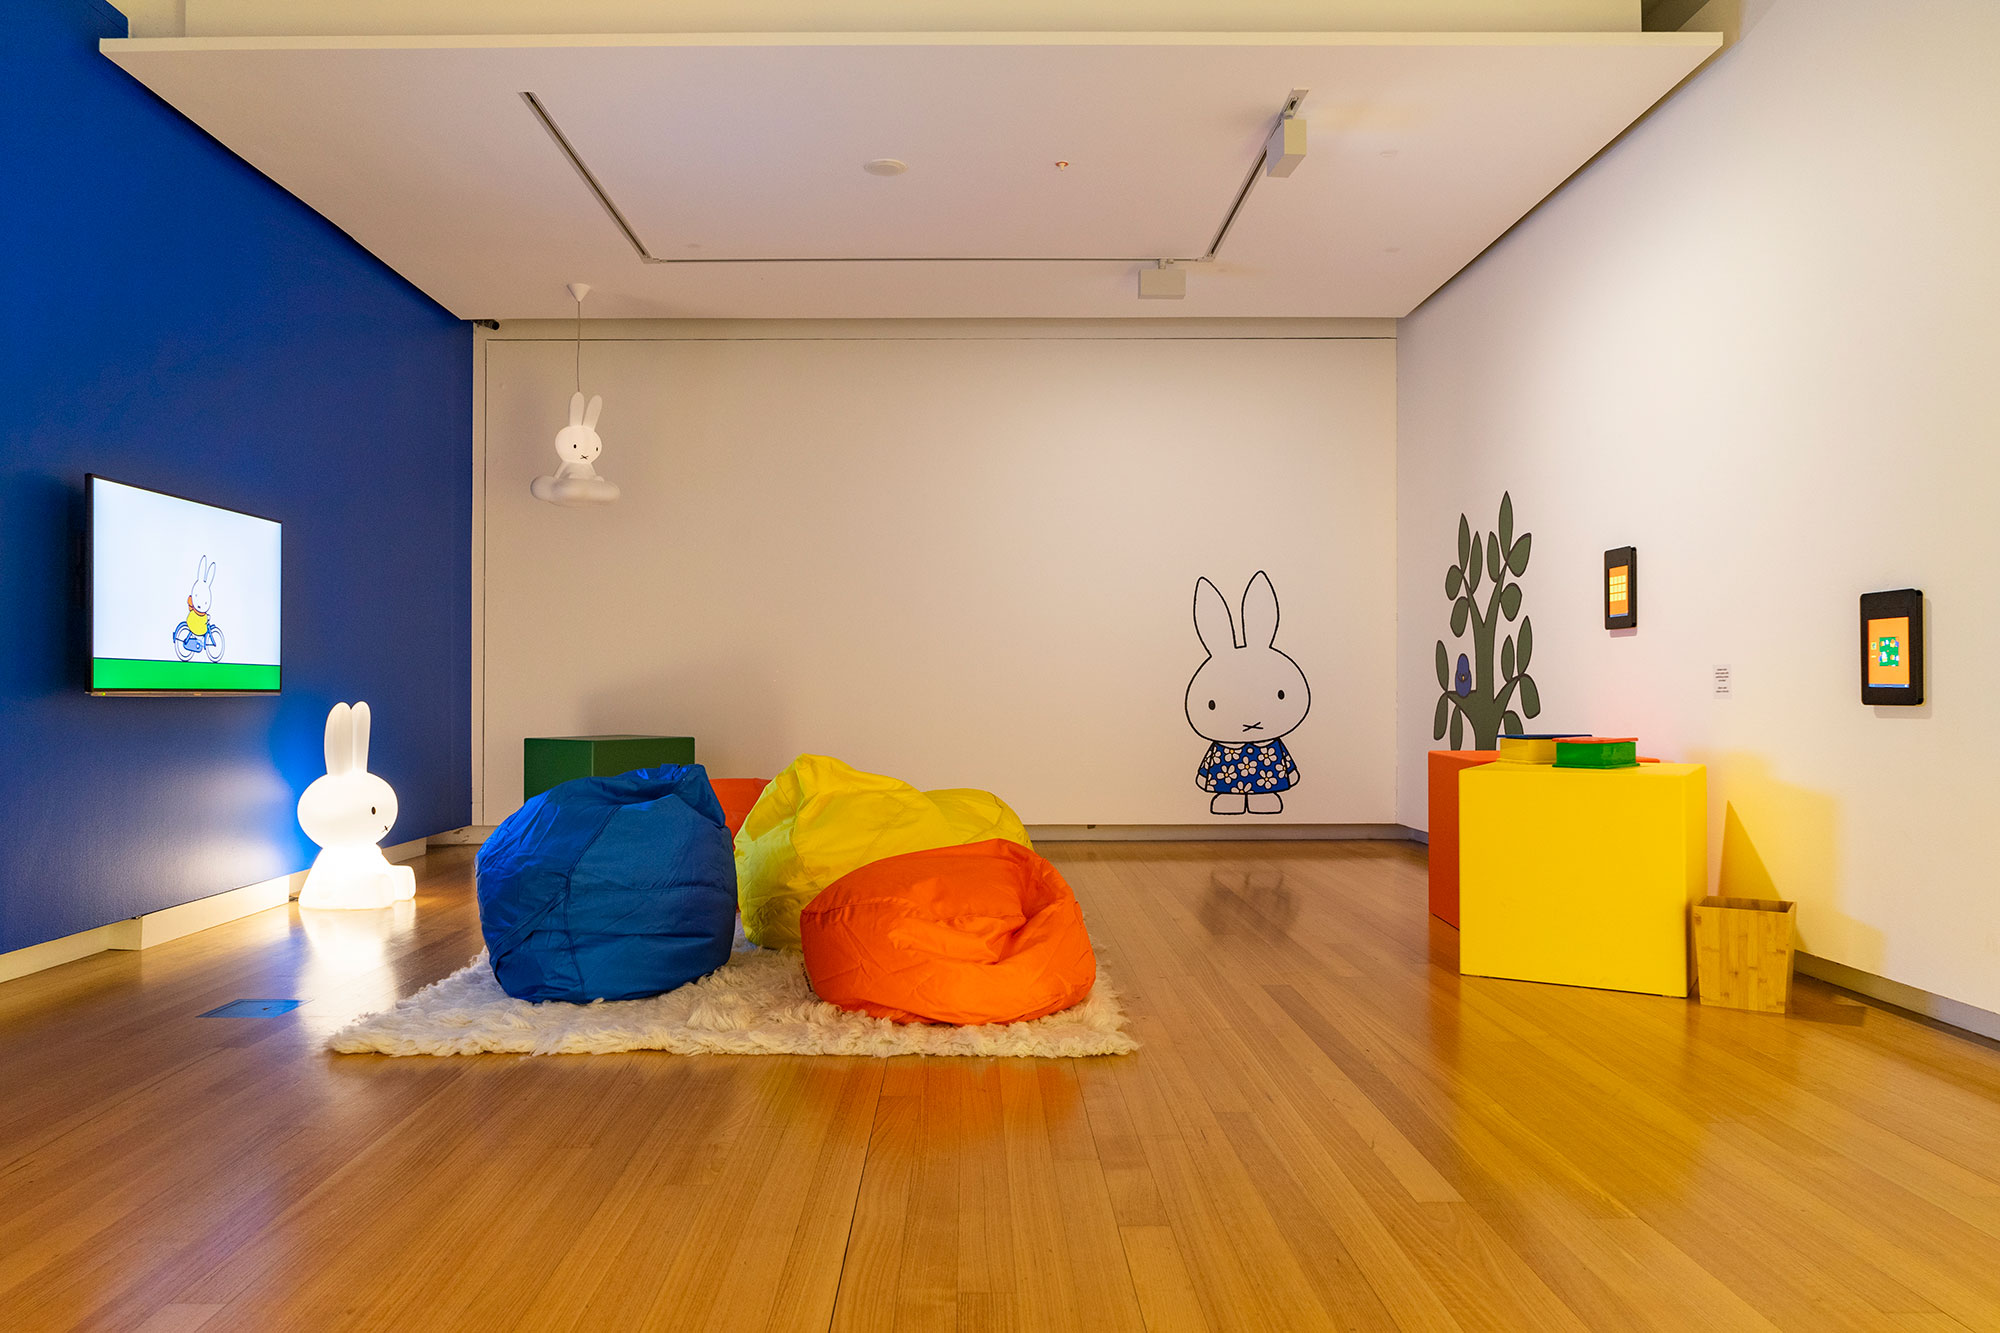 Click to open image  - Installation view of ‘miffy & friends\' (21 November 2020 - 14 March 2021), QUT Art Museum. Photo by Louis Lim